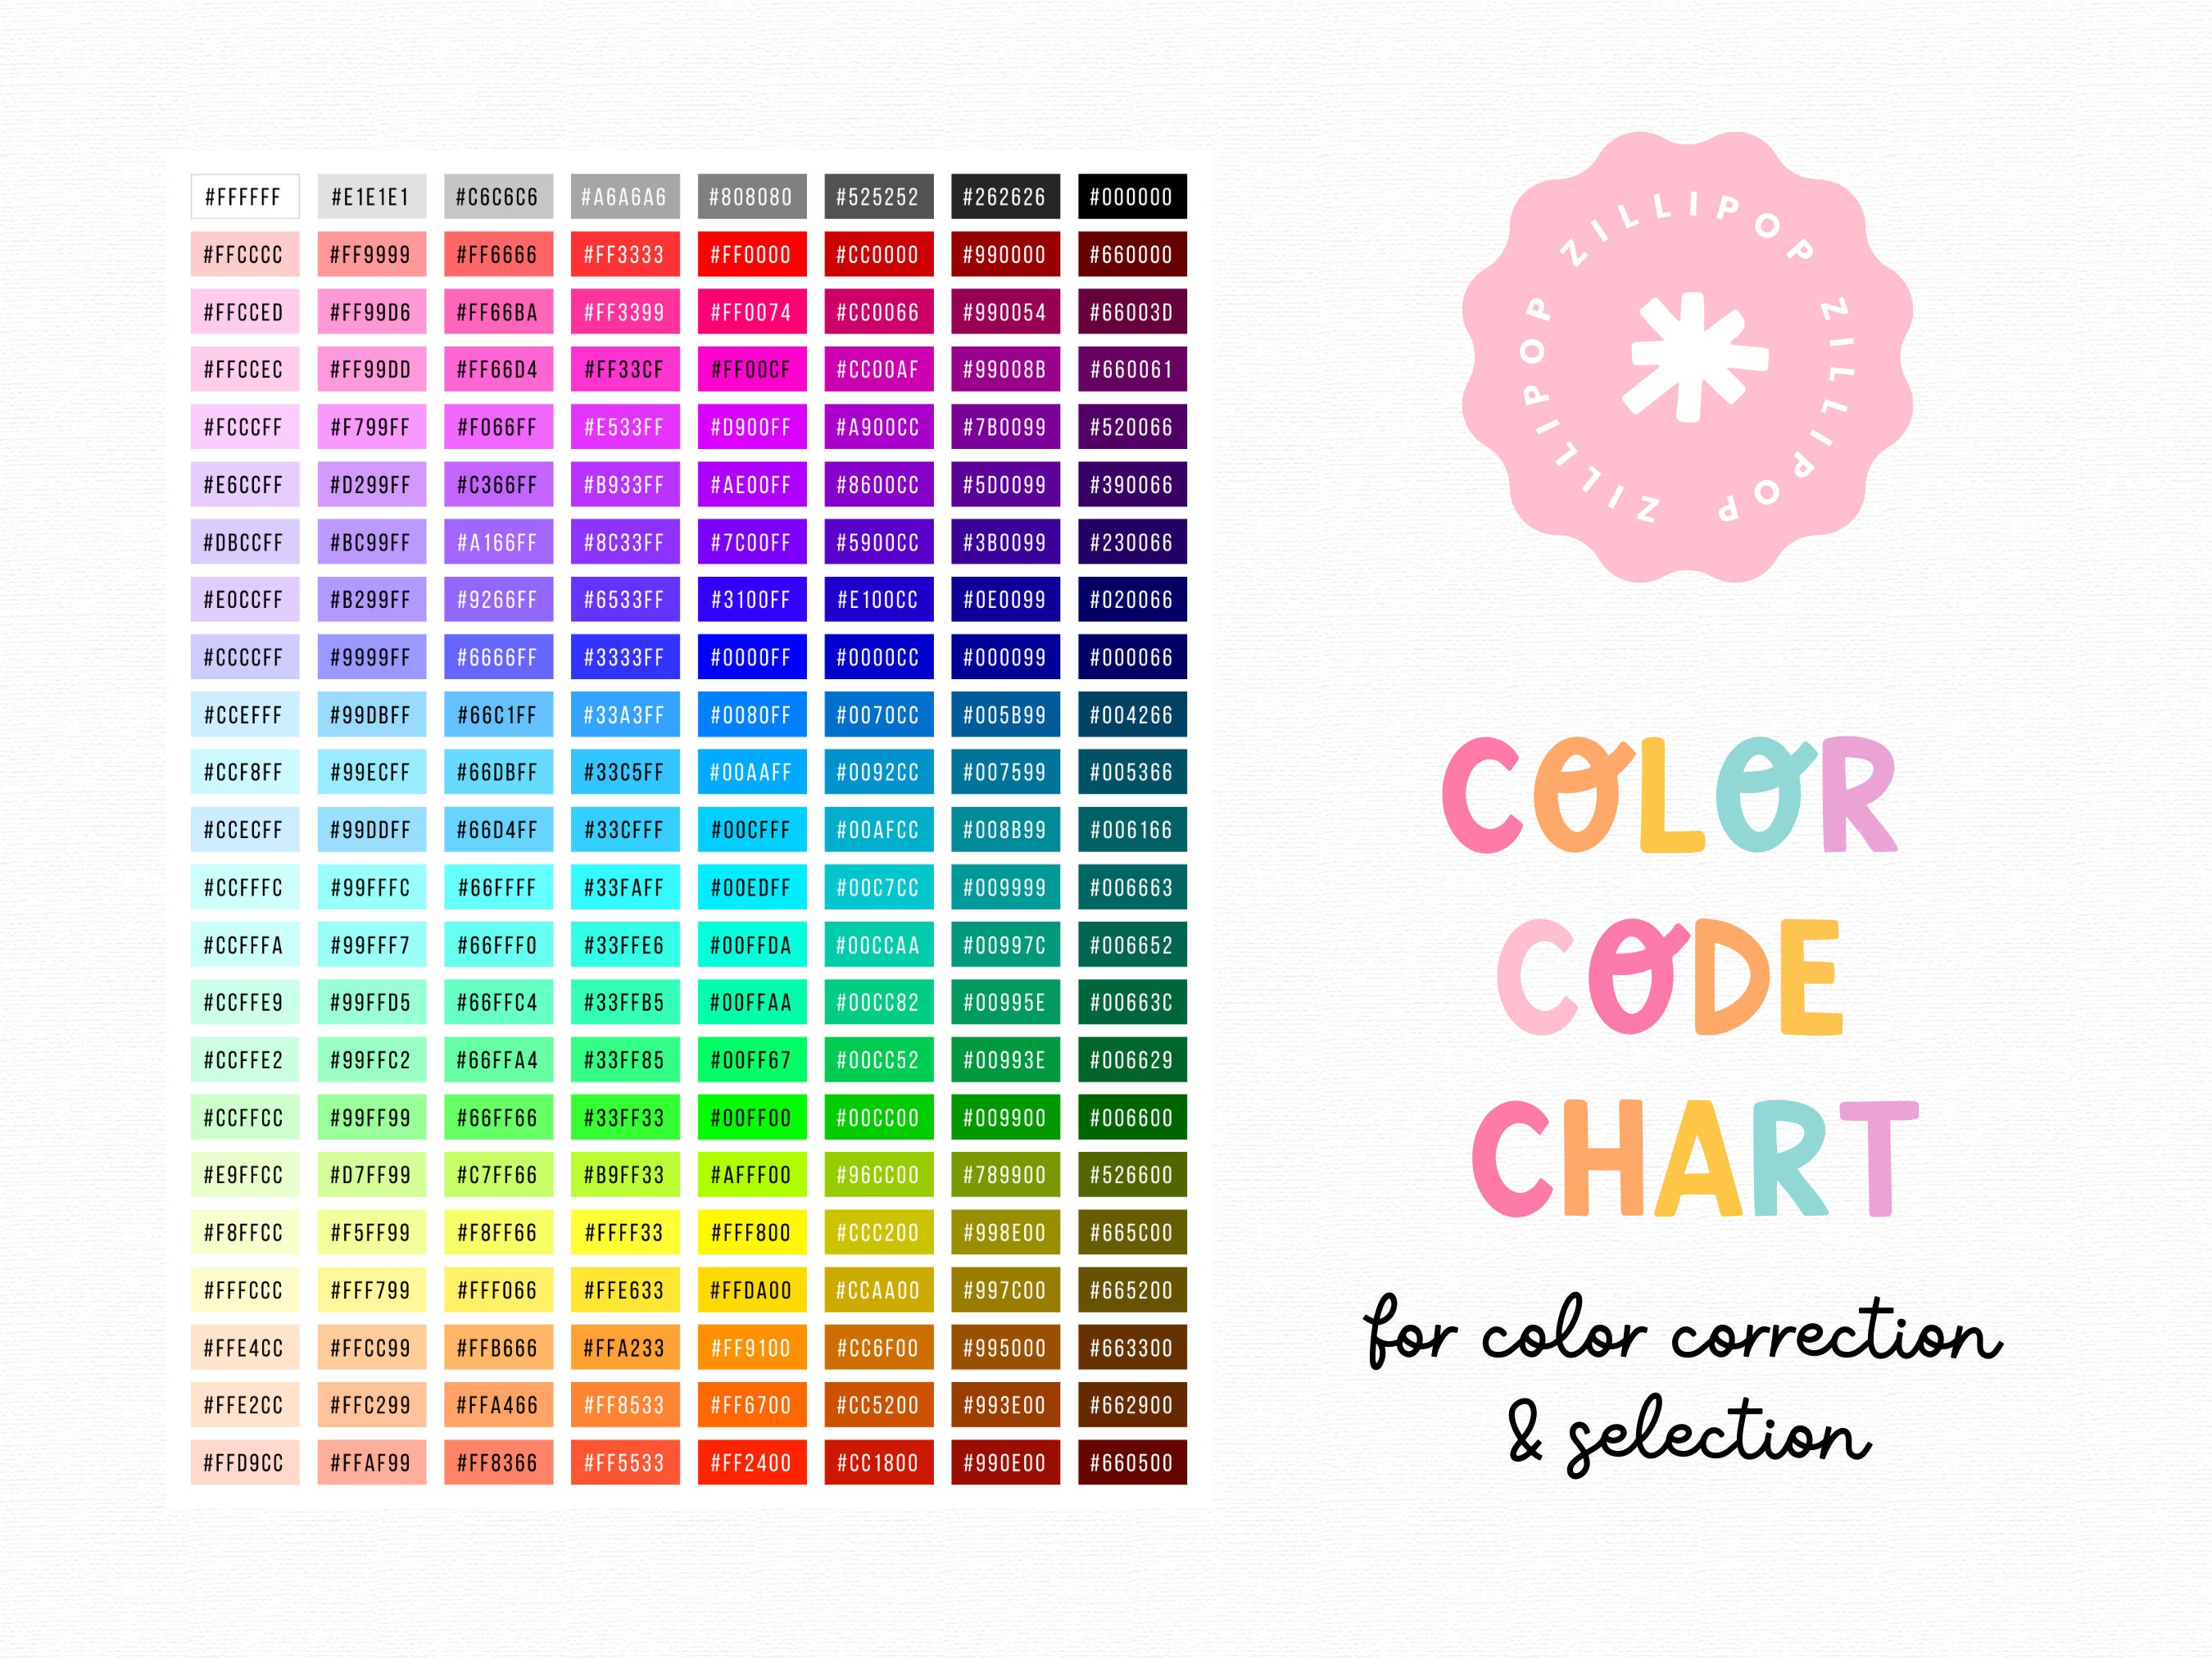 Soucolor 72 Colored Pencils Color Chart Swatch Prefilled W/ Numbers Artist  Reference Printable Adult Coloring Resource PDF 2 Pages 